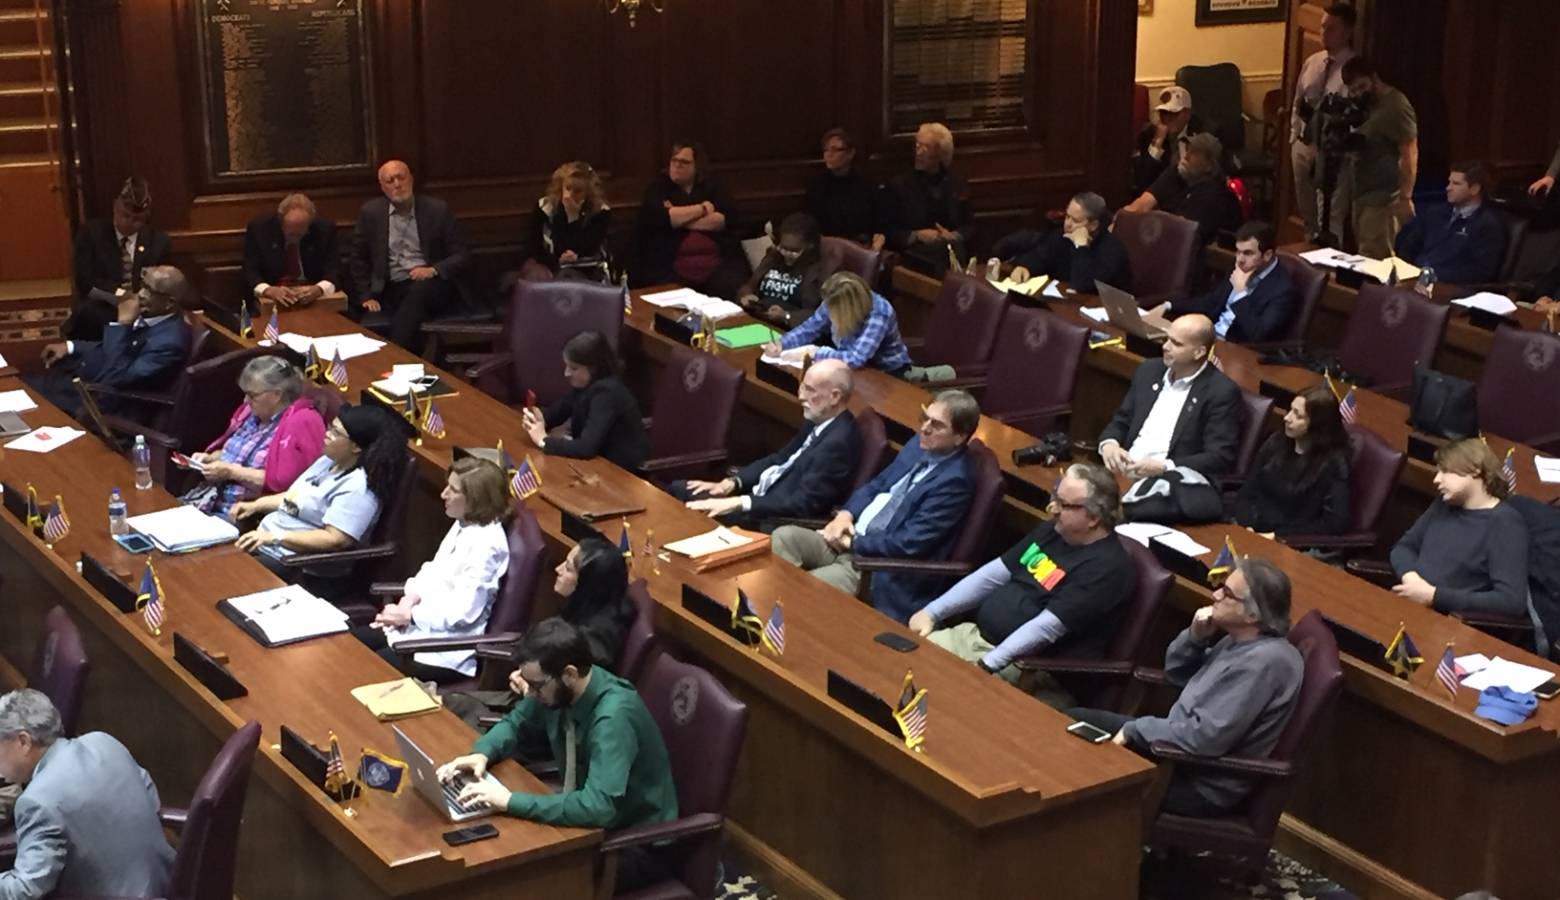 The chambers of the Indiana House were full for testimony on medical cannabis. (Jill Sheridan/IPB News)